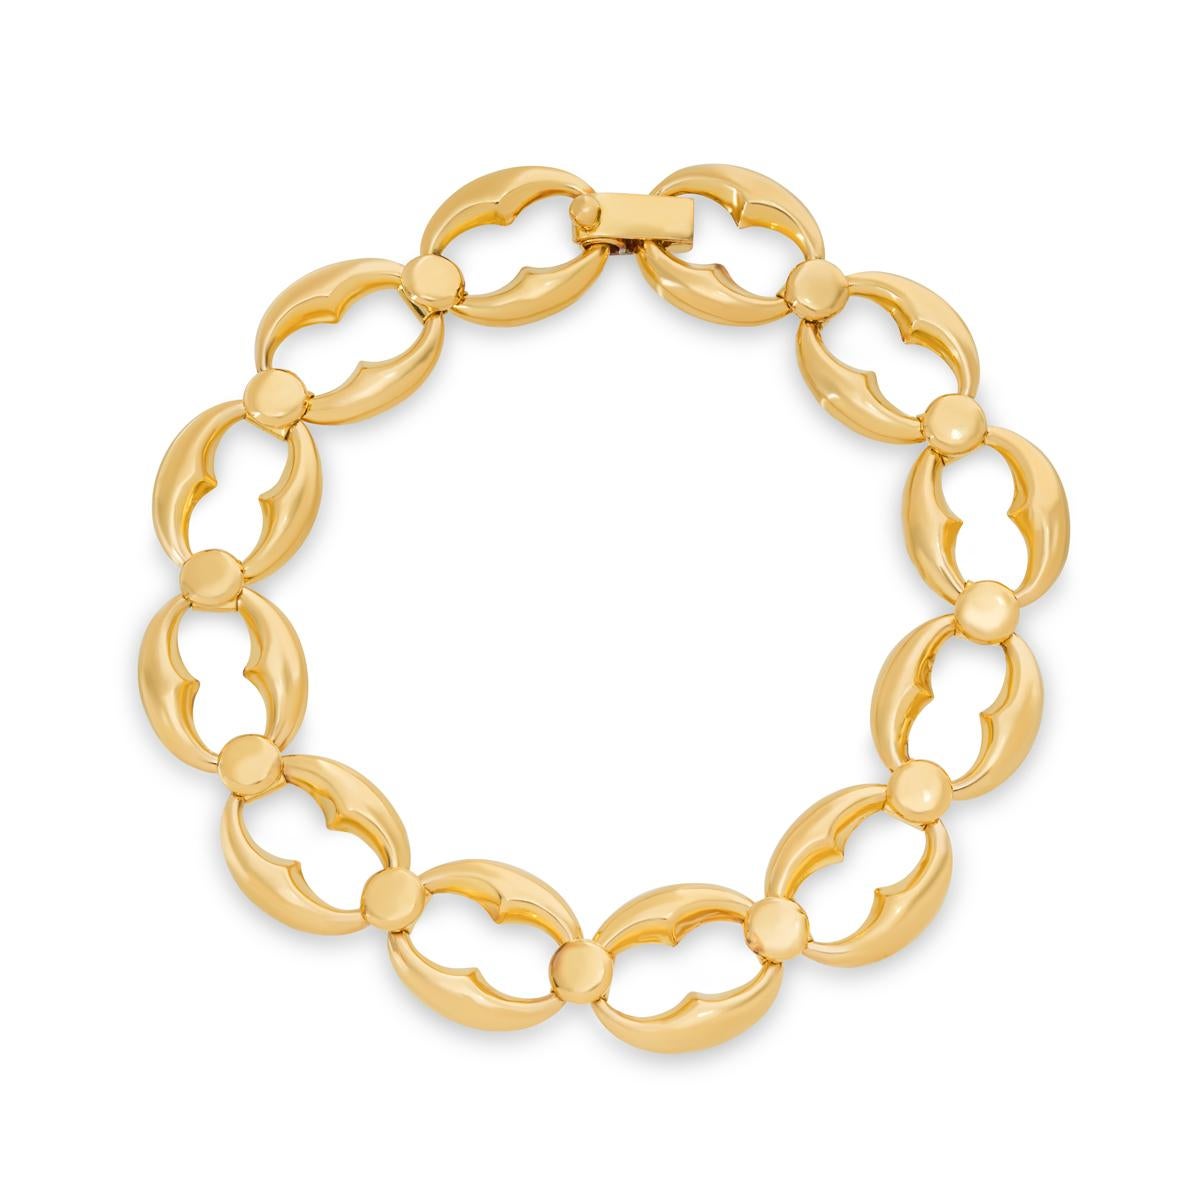 A 22k yellow gold link bracelet. The bracelet features 12 coffee bean links joined together by a round motif. The 7 inch long bracelet finishes with a foldover clasp and has a gross weight of 20.79 grams.

Comes complete with a RichDiamonds